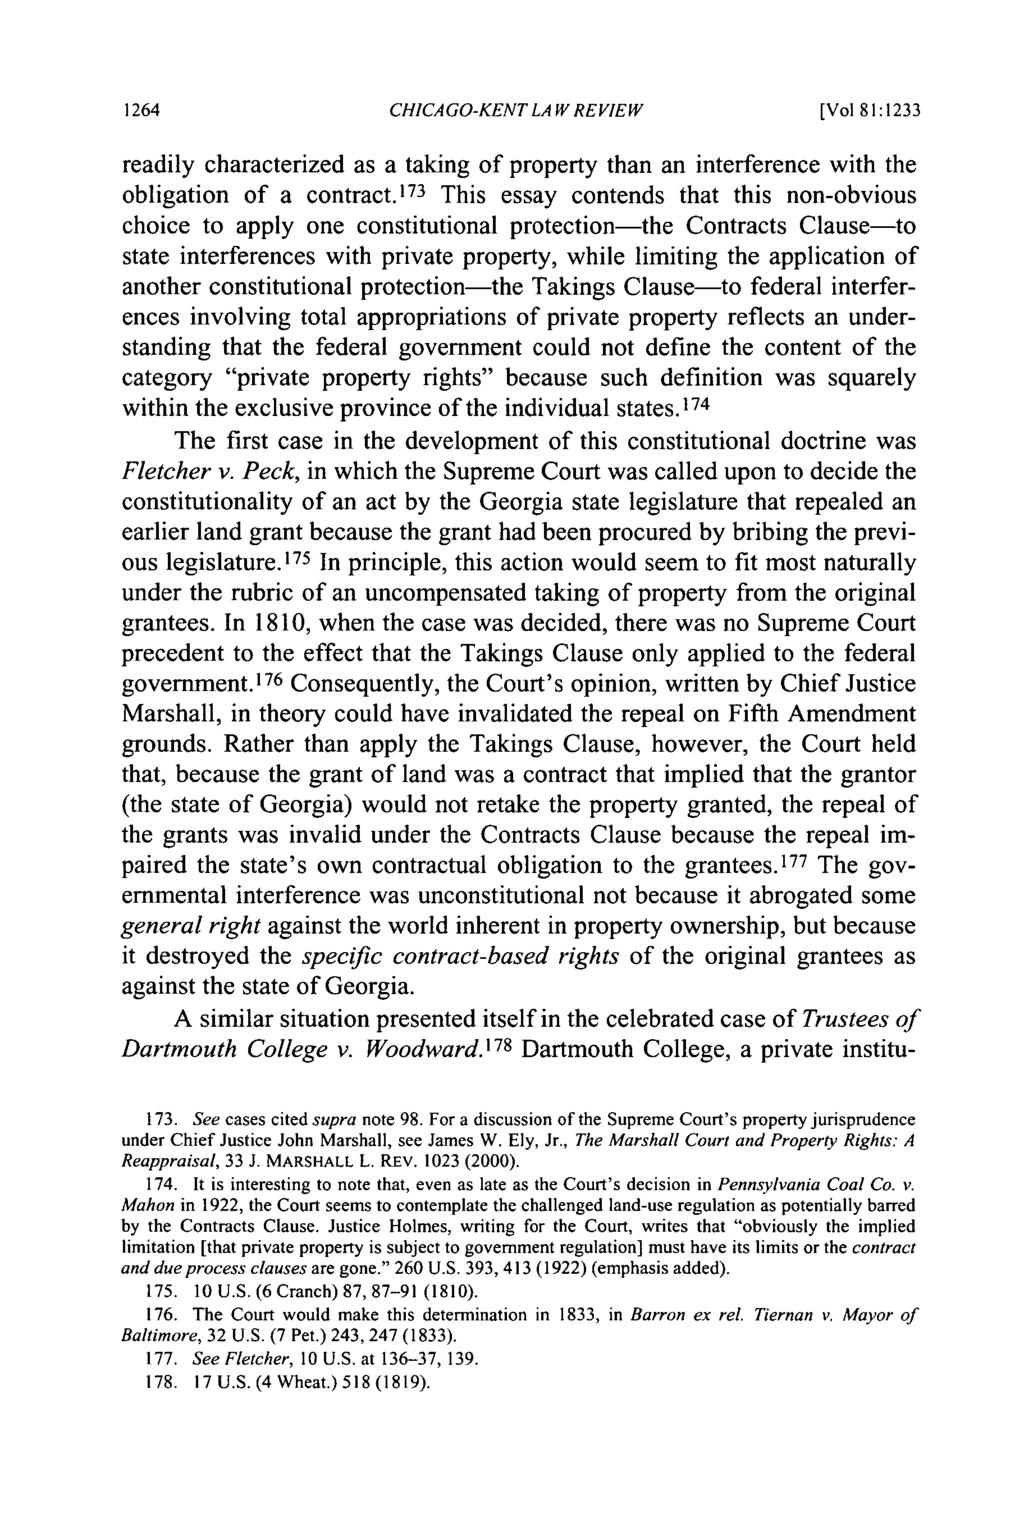 CHICAGO-KENT LA W REVIEW [Vol 81:1233 readily characterized as a taking of property than an interference with the obligation of a contract.